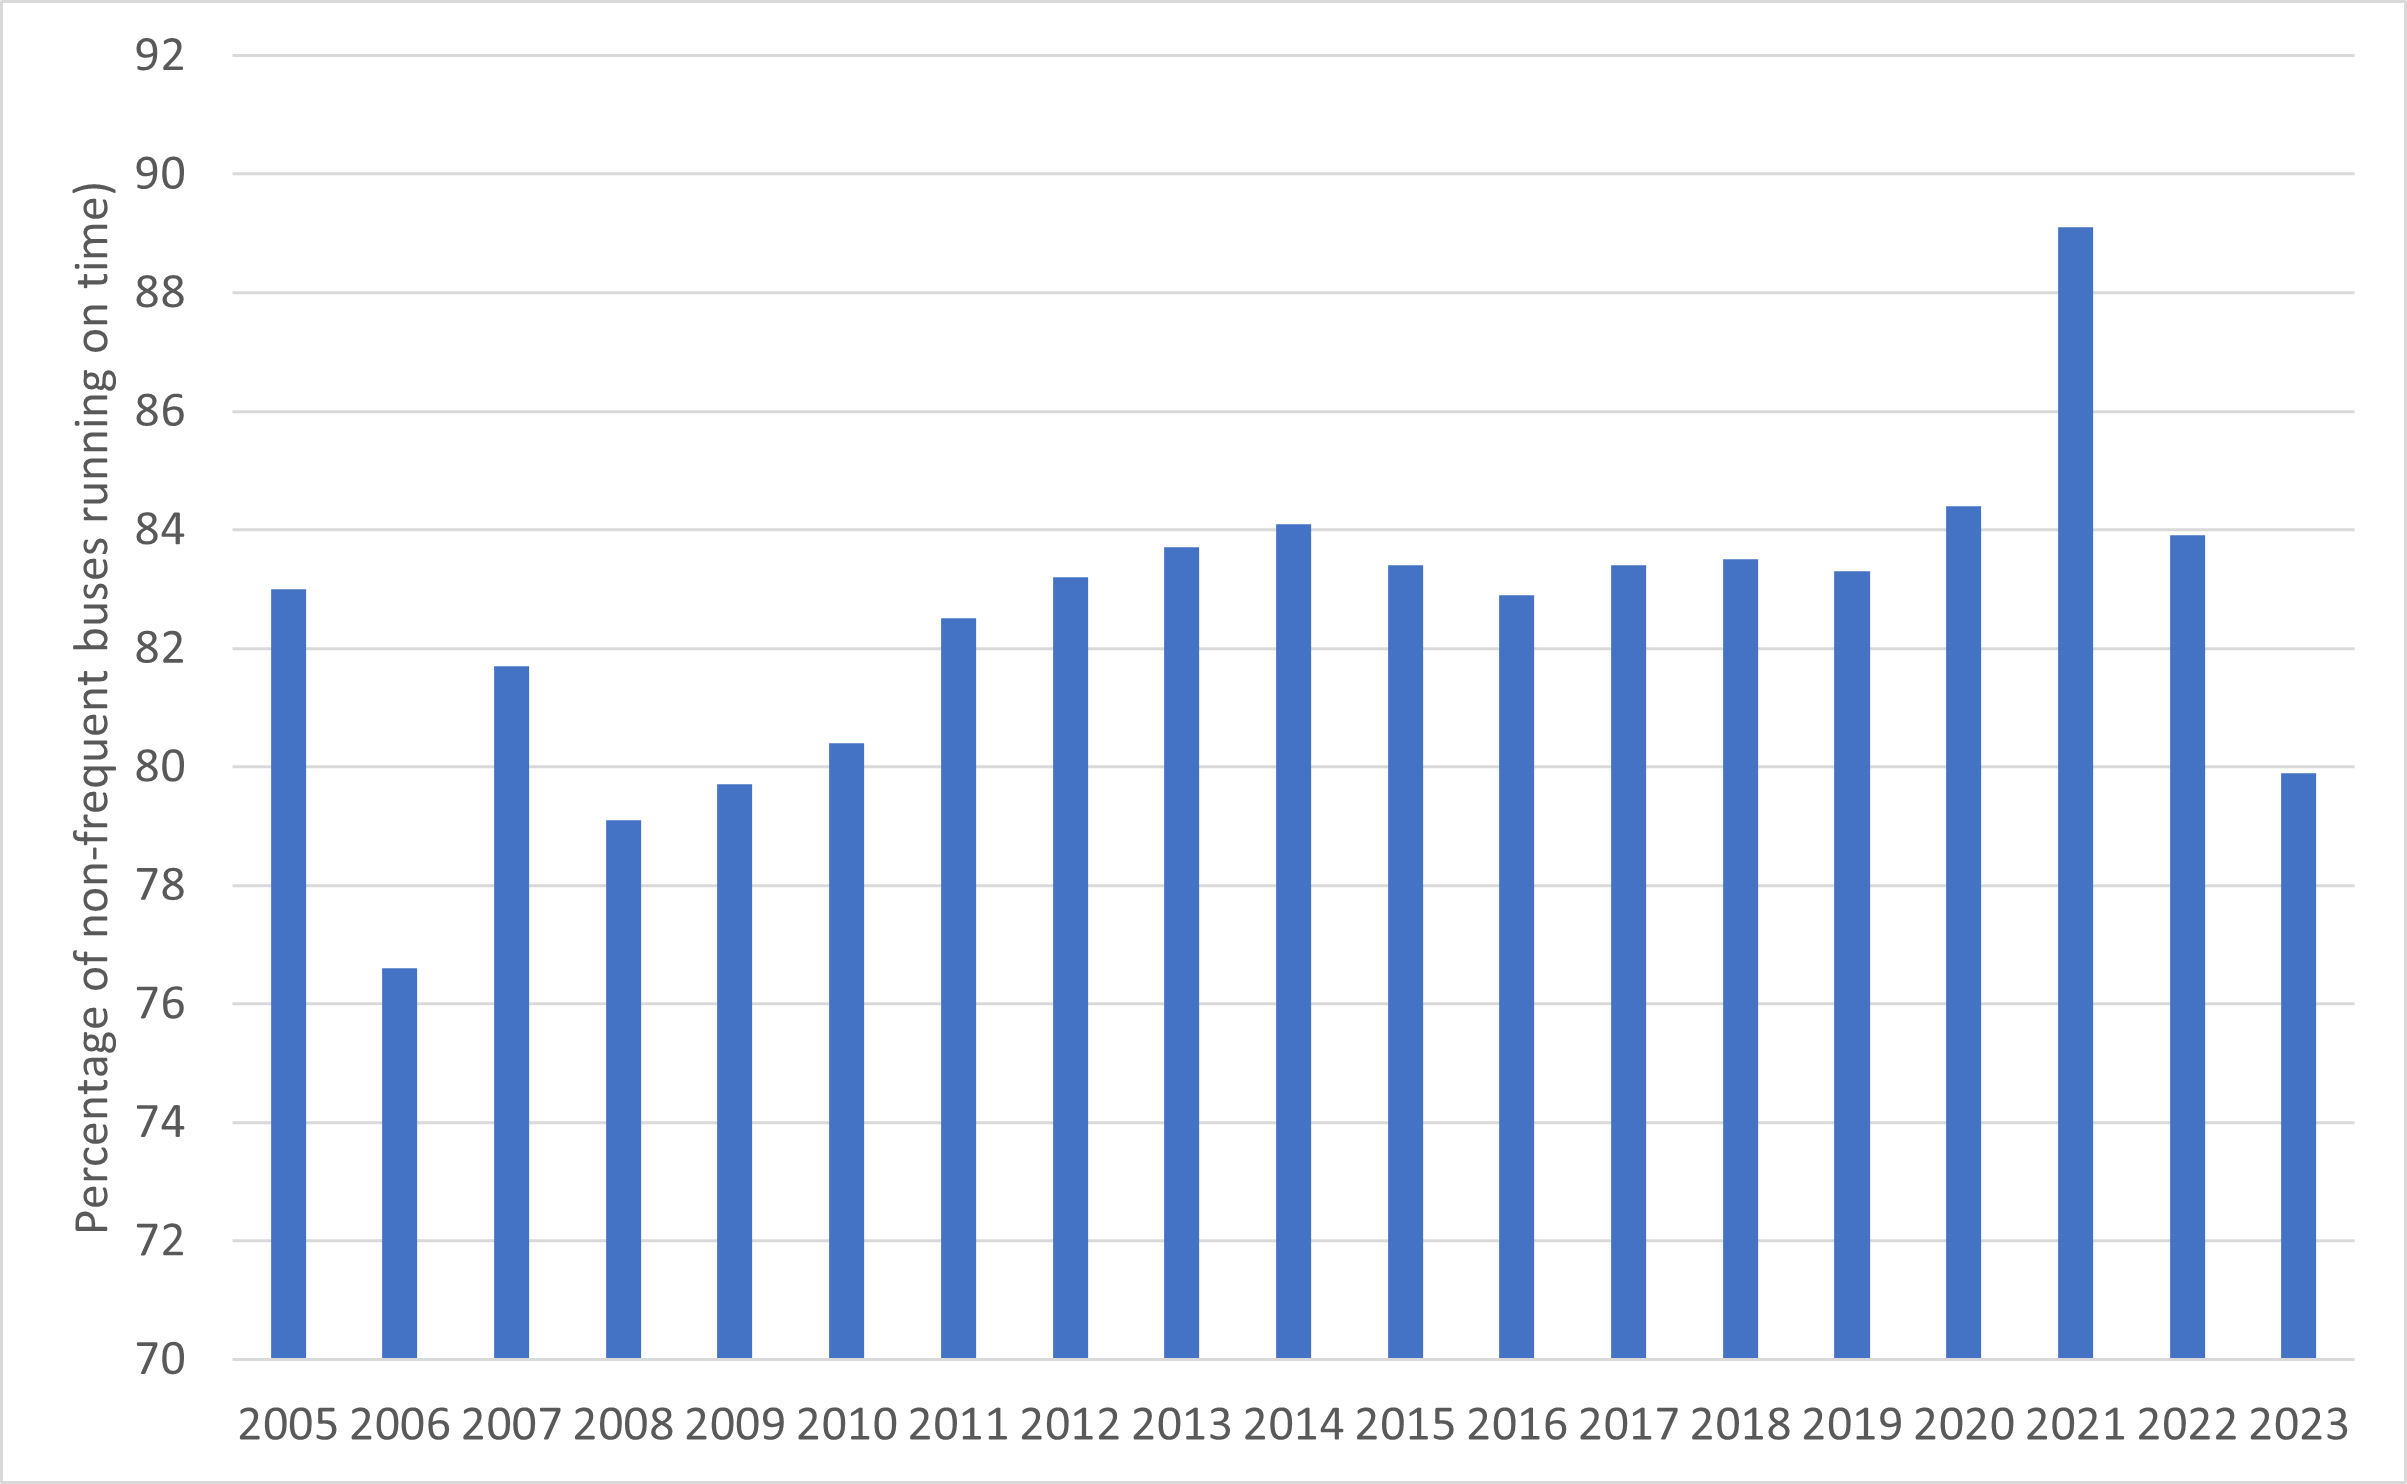 percentage of non-frequent buses running on time. In 2023 bus reliability crashed back to a level last seen in 2010